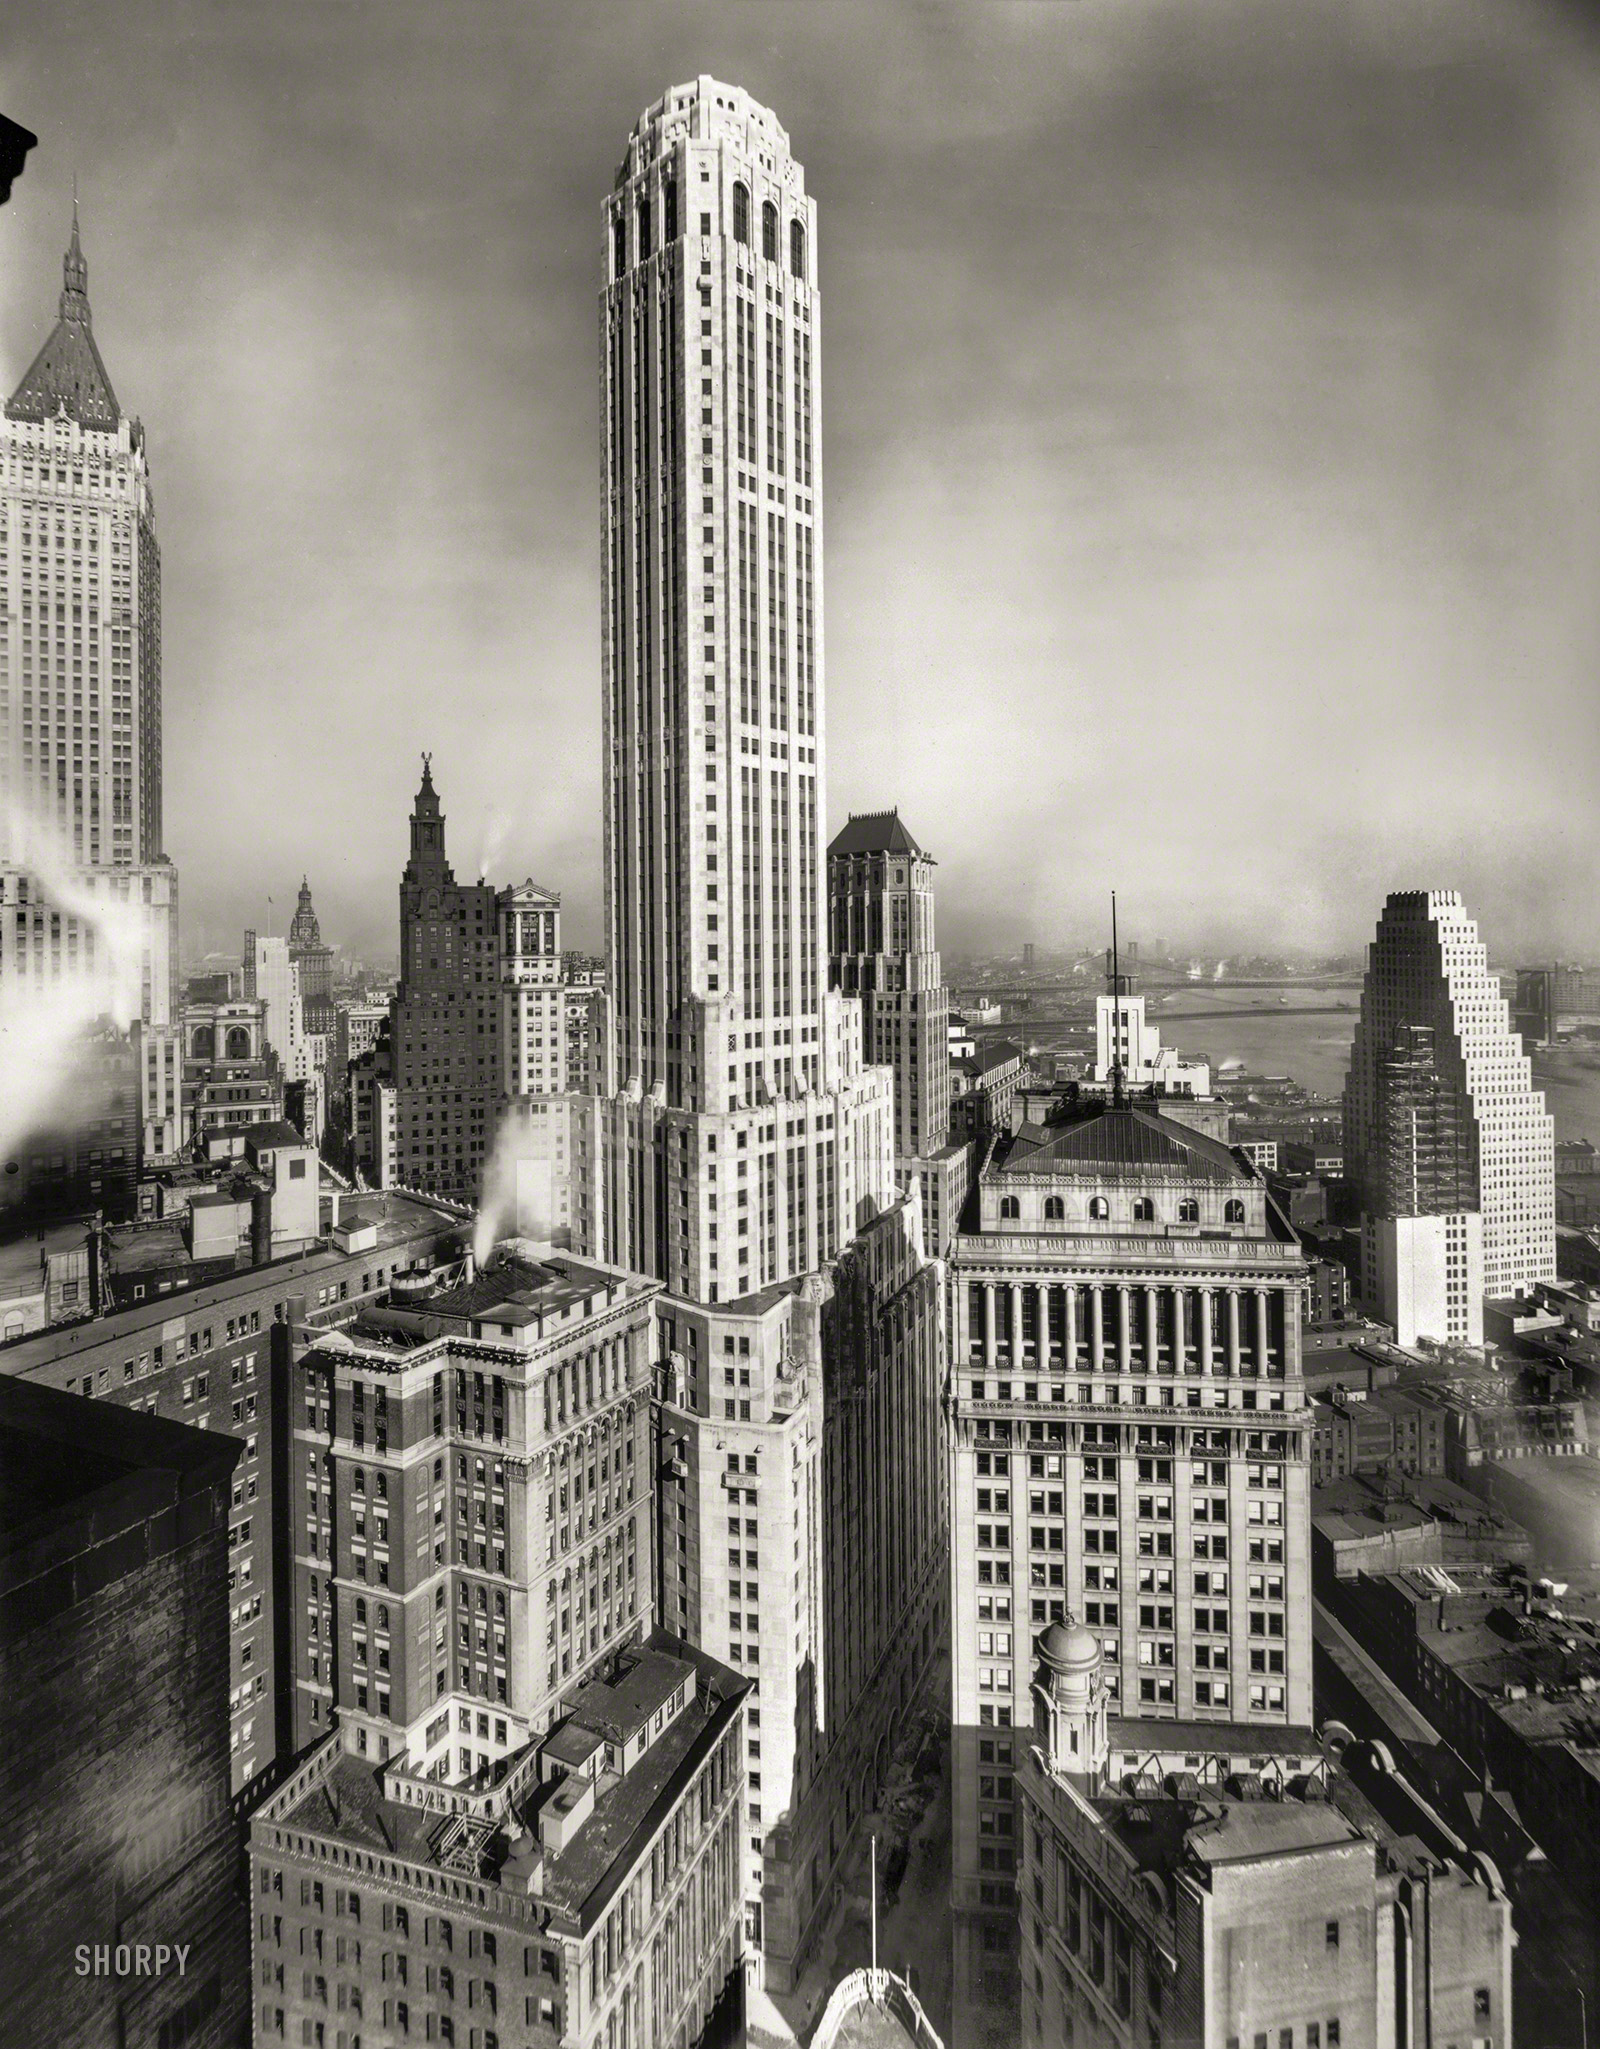 New York, 1931. "City Bank-Farmers Trust Building, William & Beaver streets. Cross & Cross, architects." 11x13 gelatin silver print by Irving Underhill. View full size.